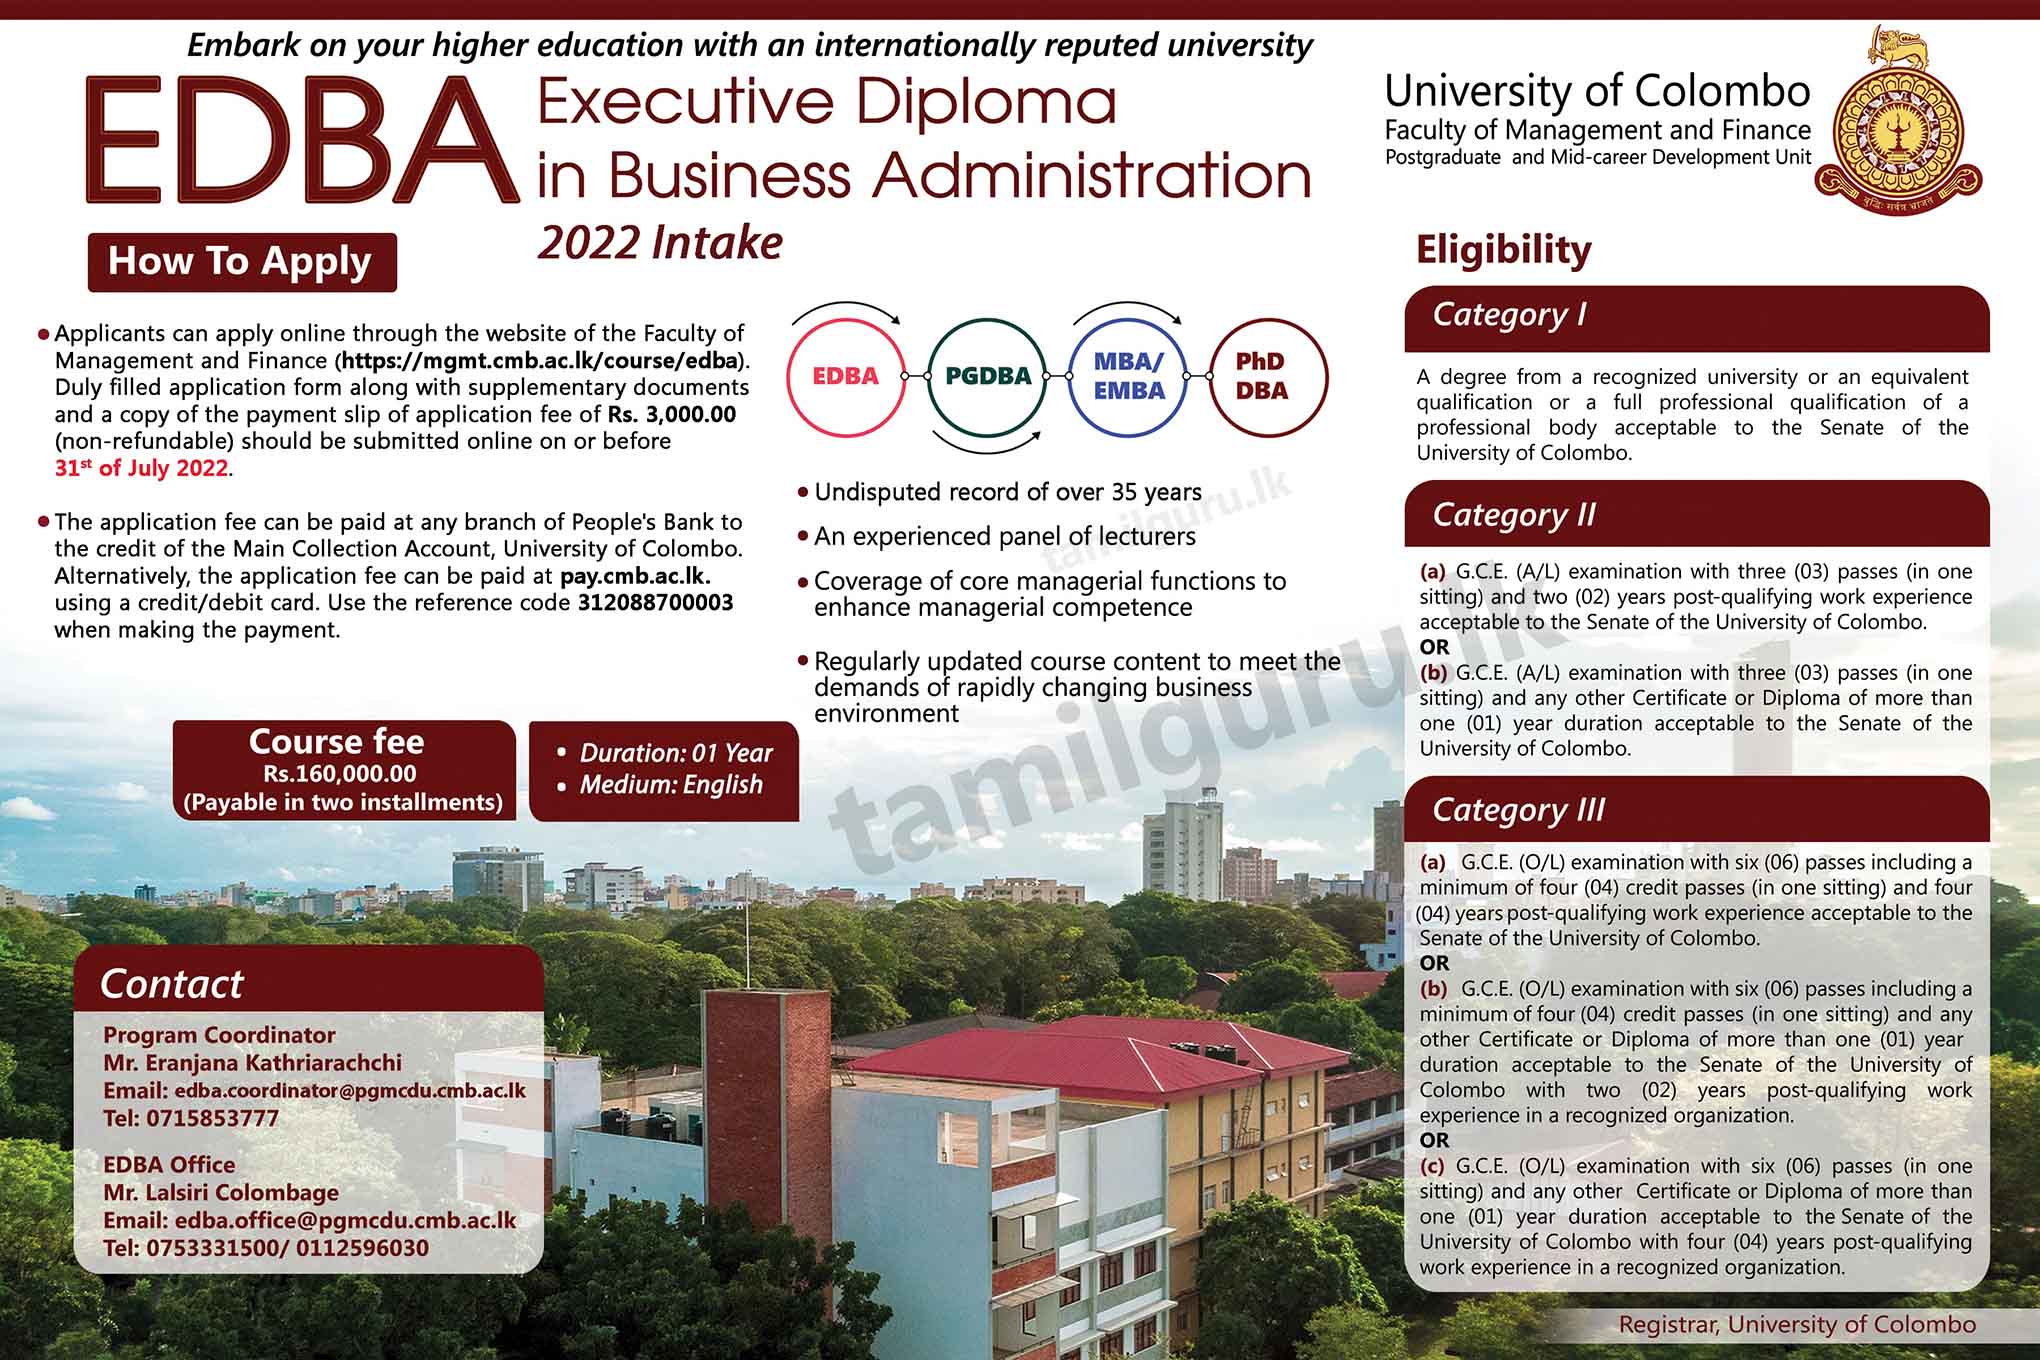 Calling Applications for Executive Diploma in Business Administration (EDBA) Course (2022 Intake) - University of Colombo